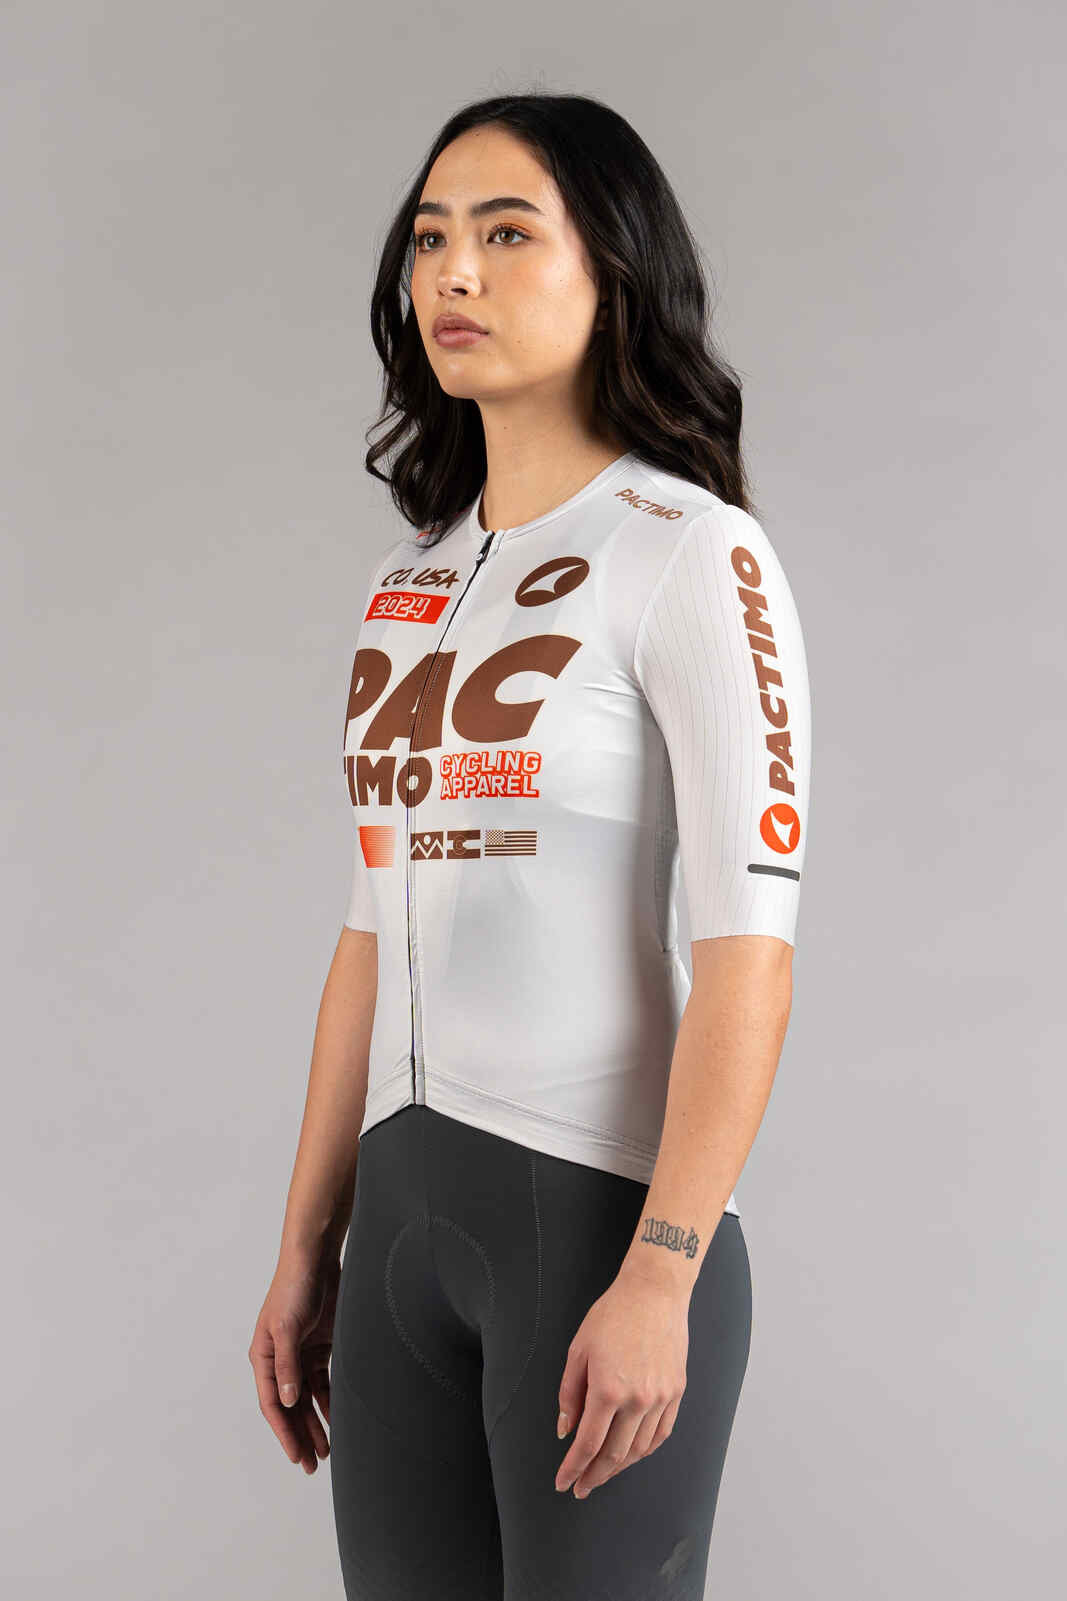 Women's Flyte White Cycling Jersey - Front View